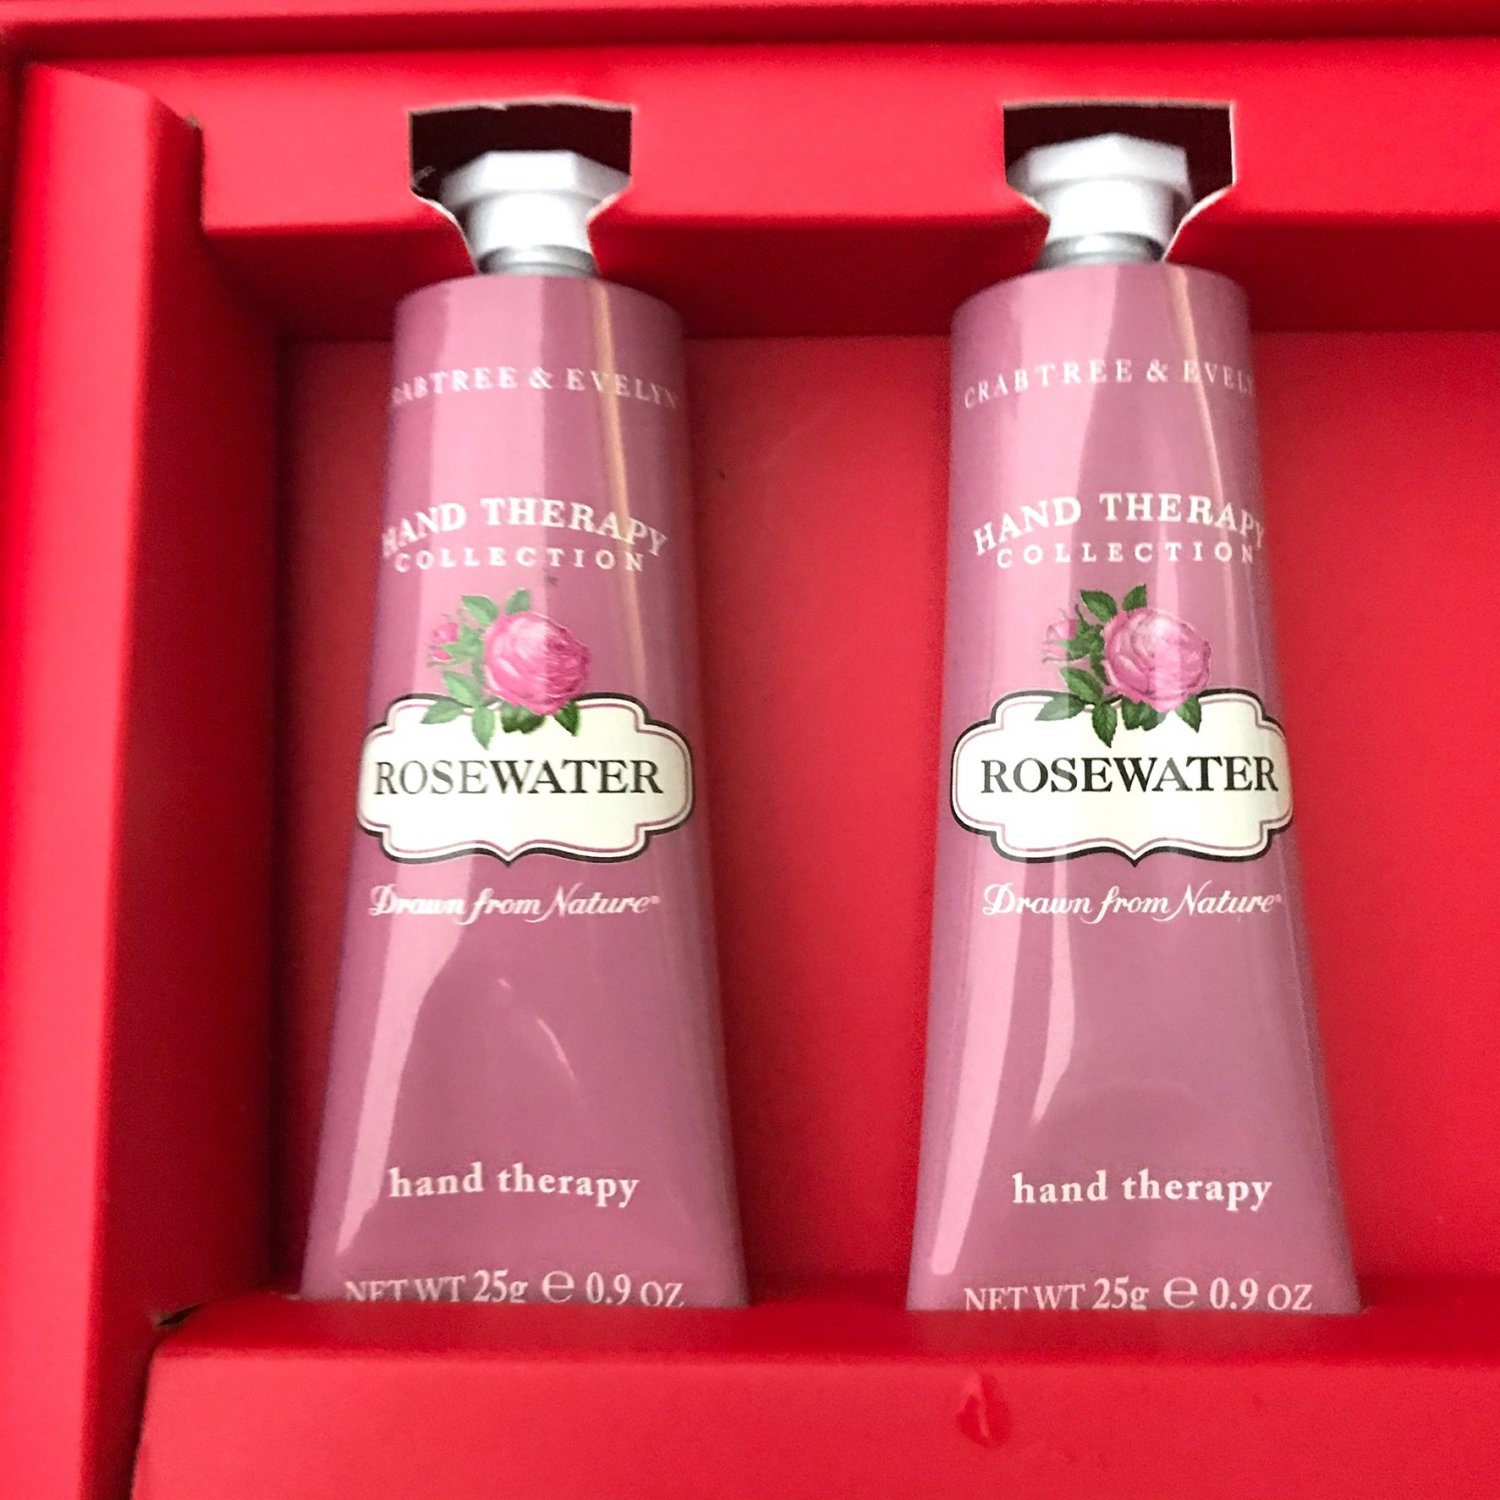 Crabtree Evelyn Hand Therapy X2 Rosewater purse travel Size 0.9 oz/25g ml tubes